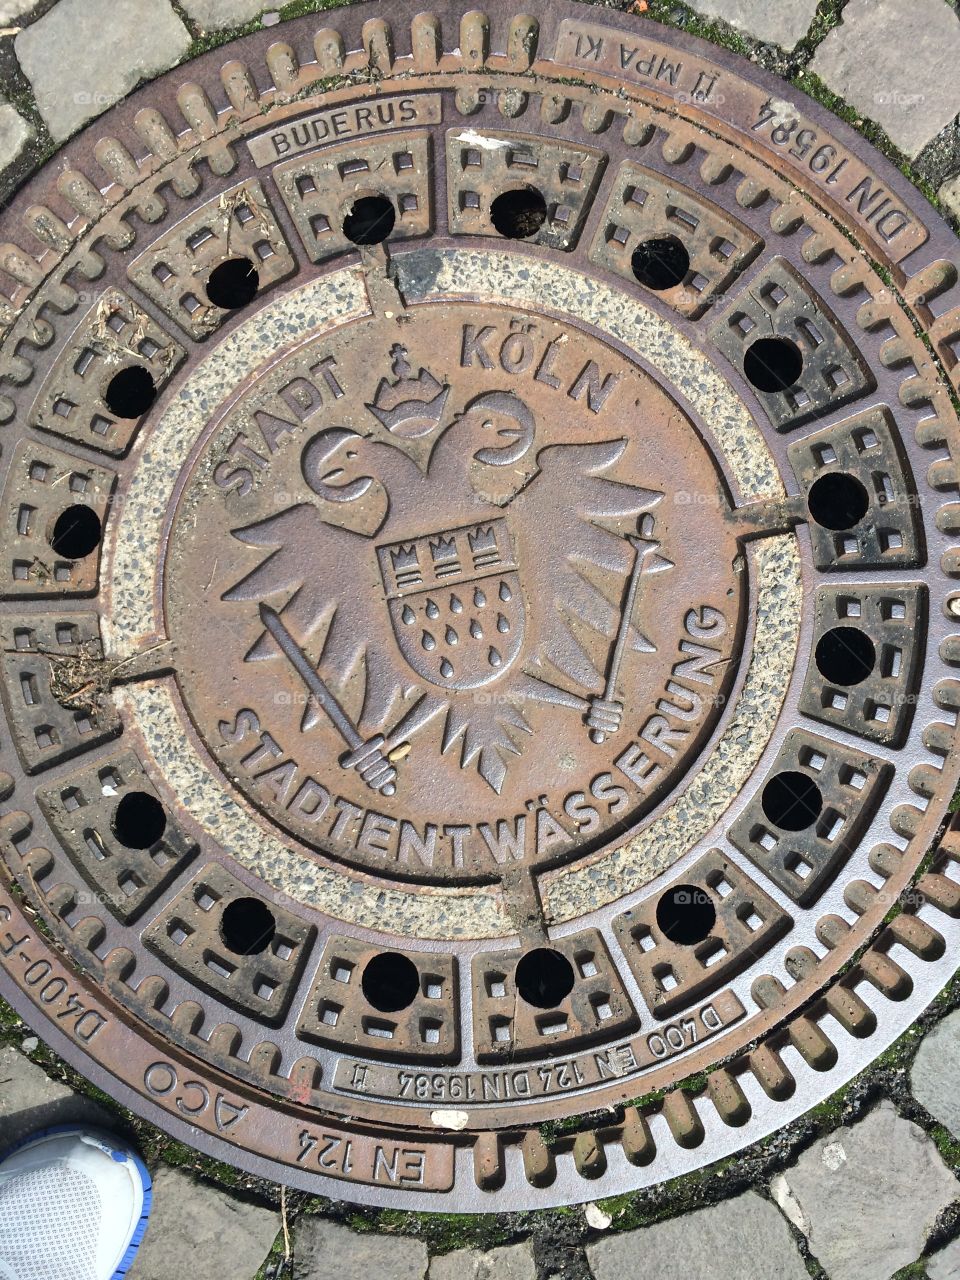 German sewer cover